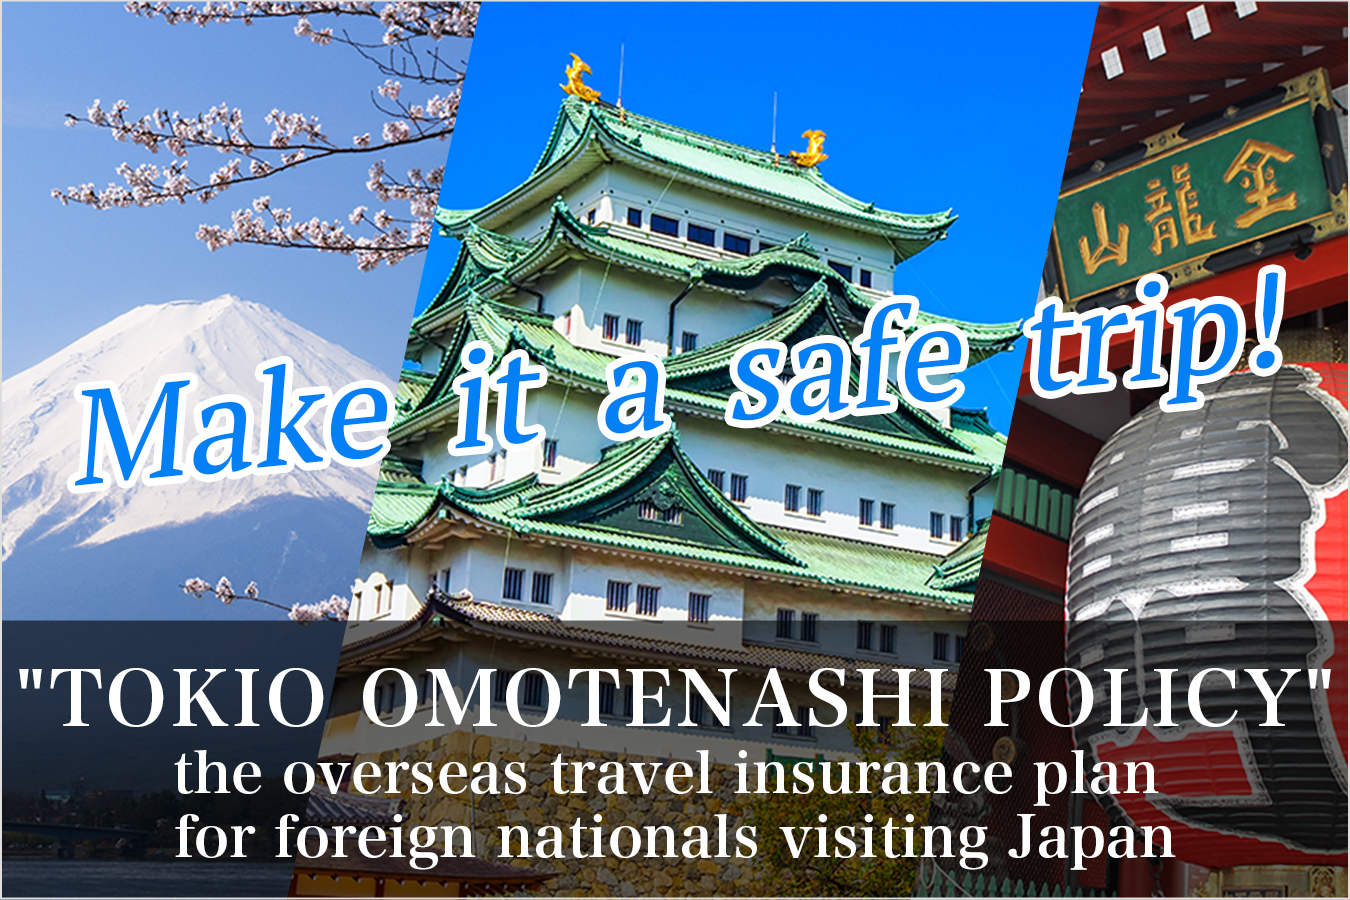 [TOKIO OMOTENASHI POLICY] the overseas travel insurance plan  for foreign nationals visit